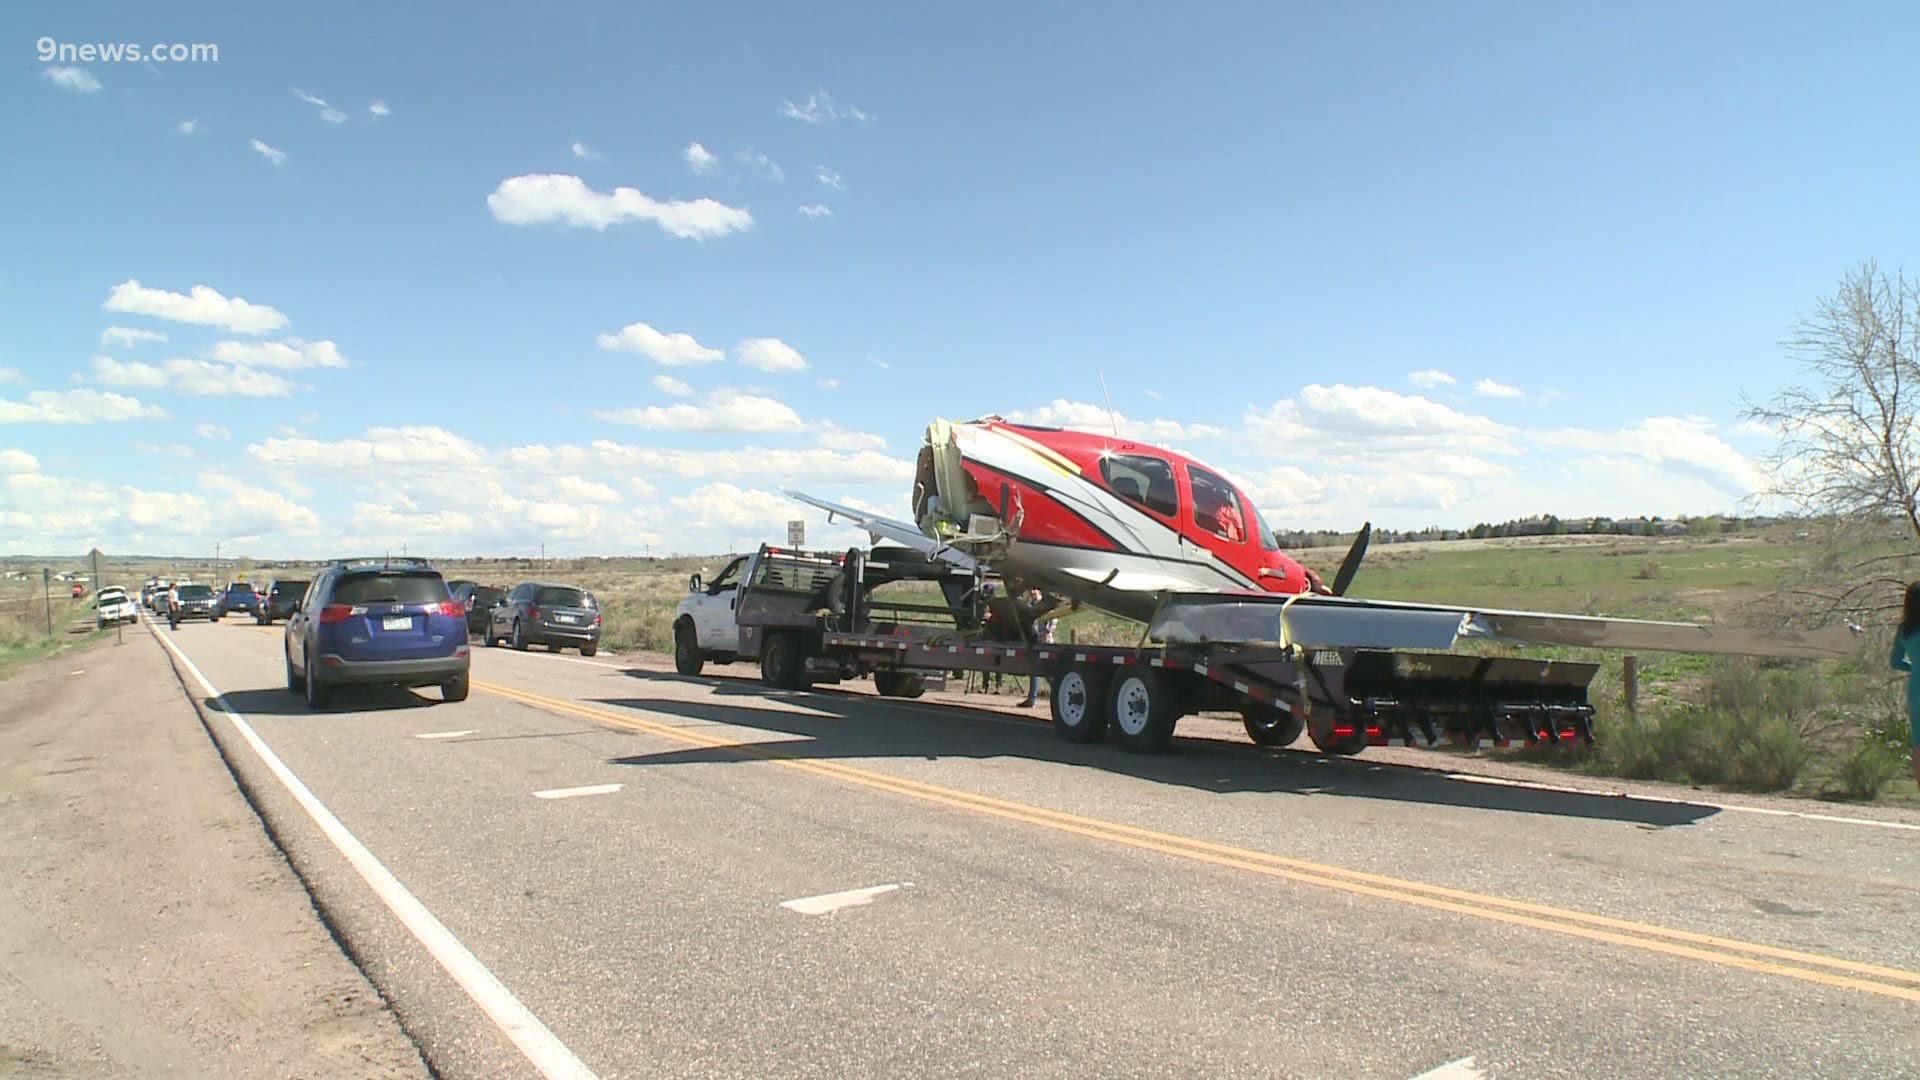 The two planes were in the process of landing at Centennial Airport in Arapahoe County, Colorado.